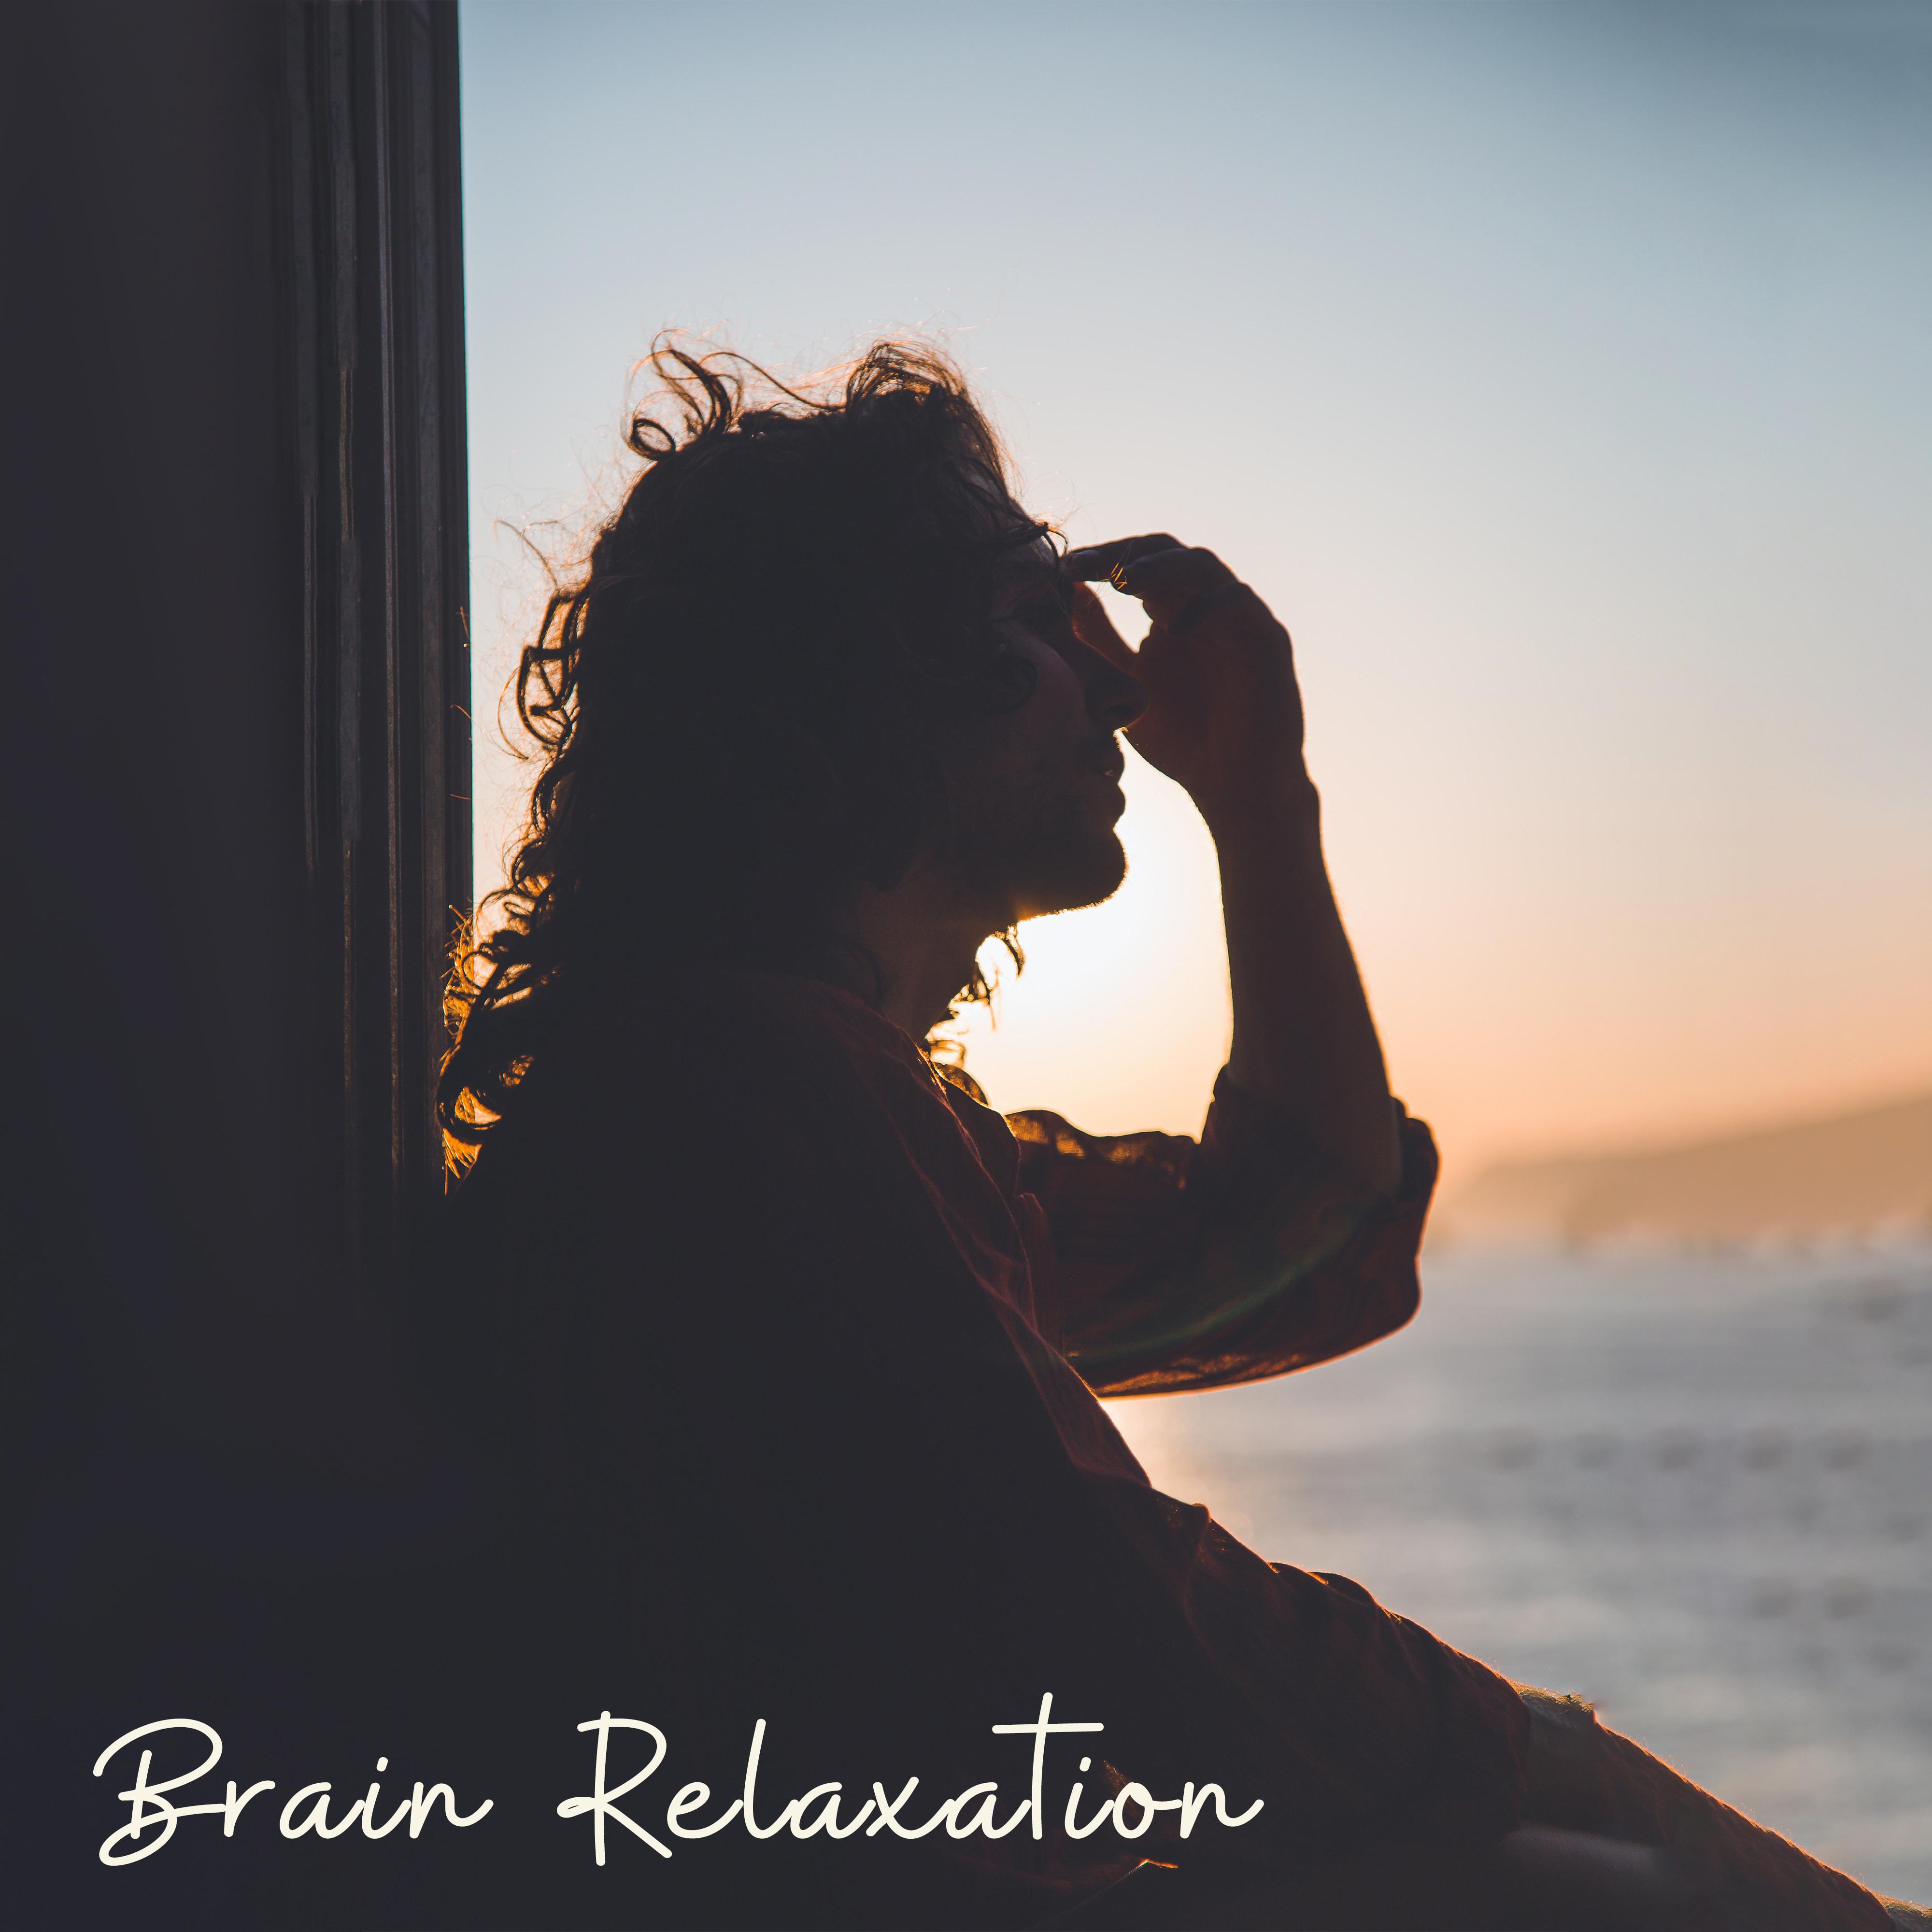 Brain Relaxation: Relaxing Music After an Intense Time of Increased Effort of Mind, Study or Work